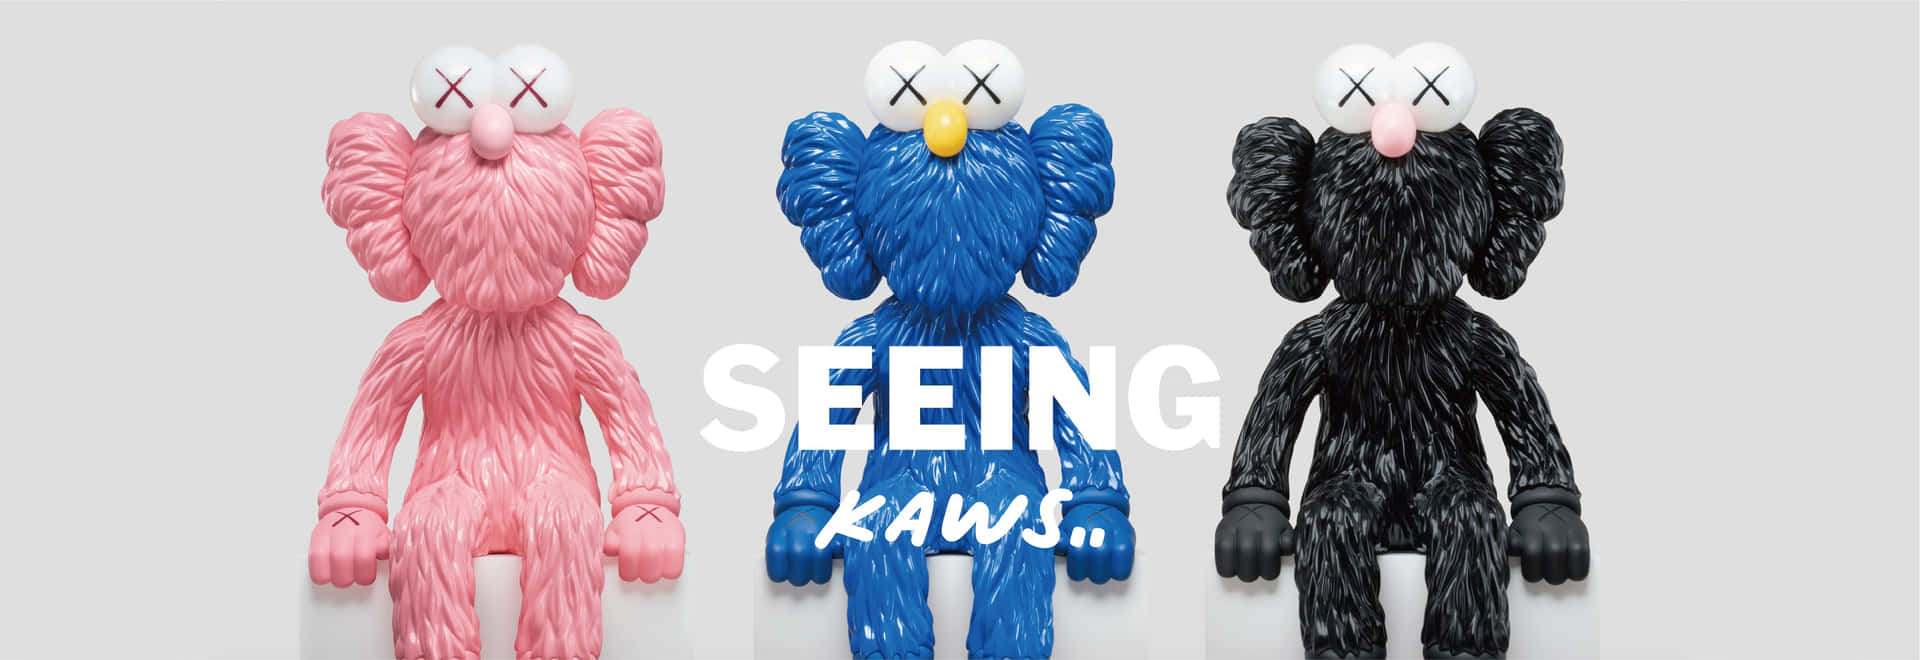 Creative and Colorful Artwork by KAWS